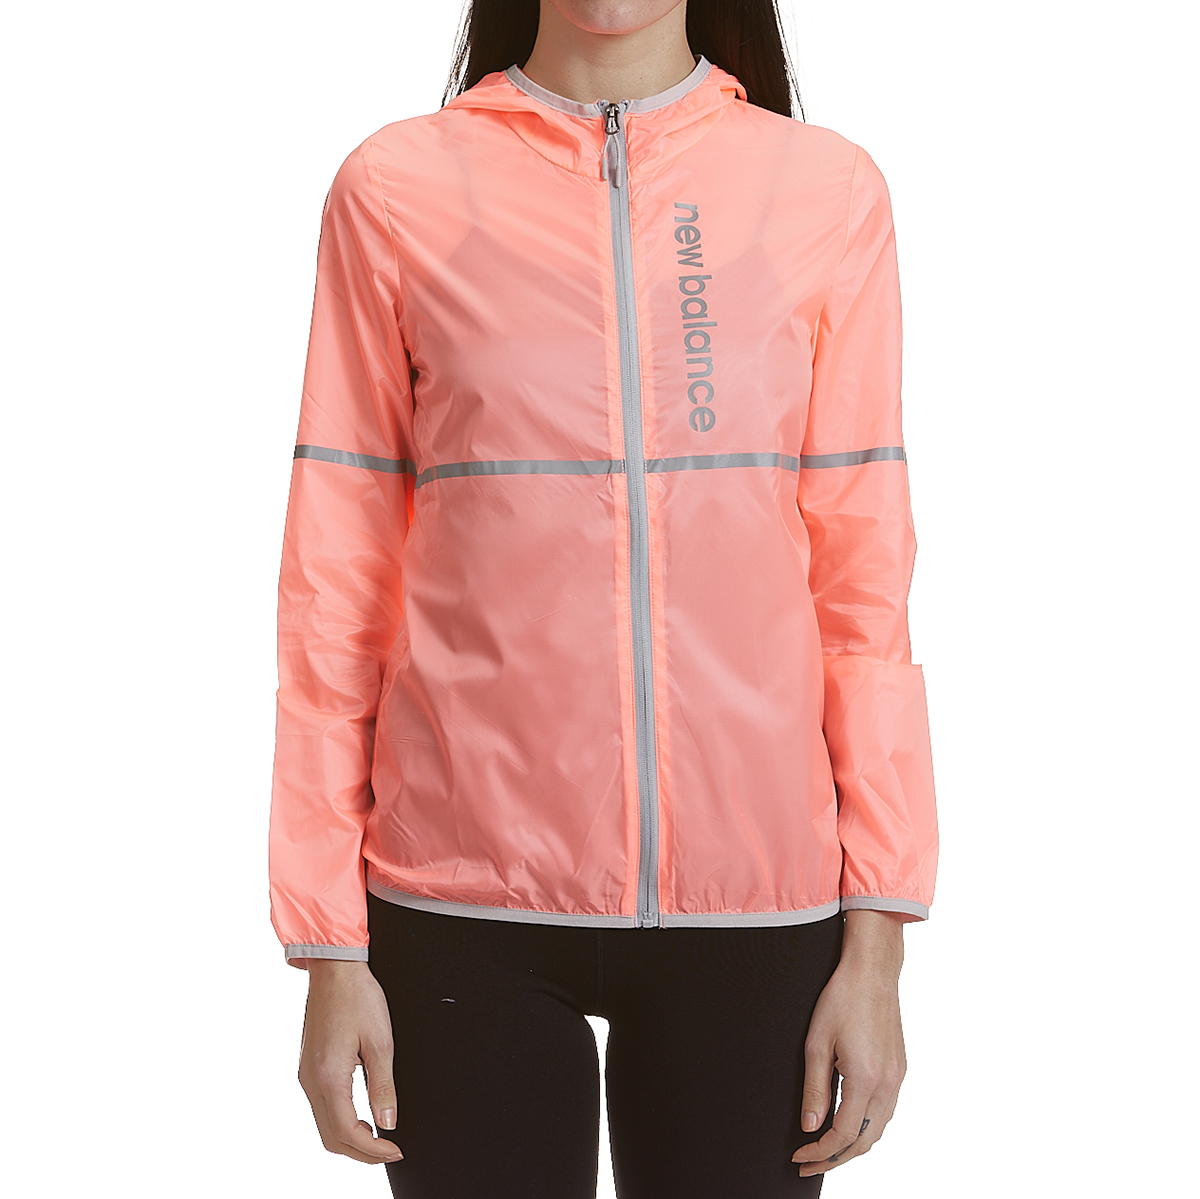 New Balance Women's Translucent Ribstop Hooded Jacket With Reflective Trim - Red, M